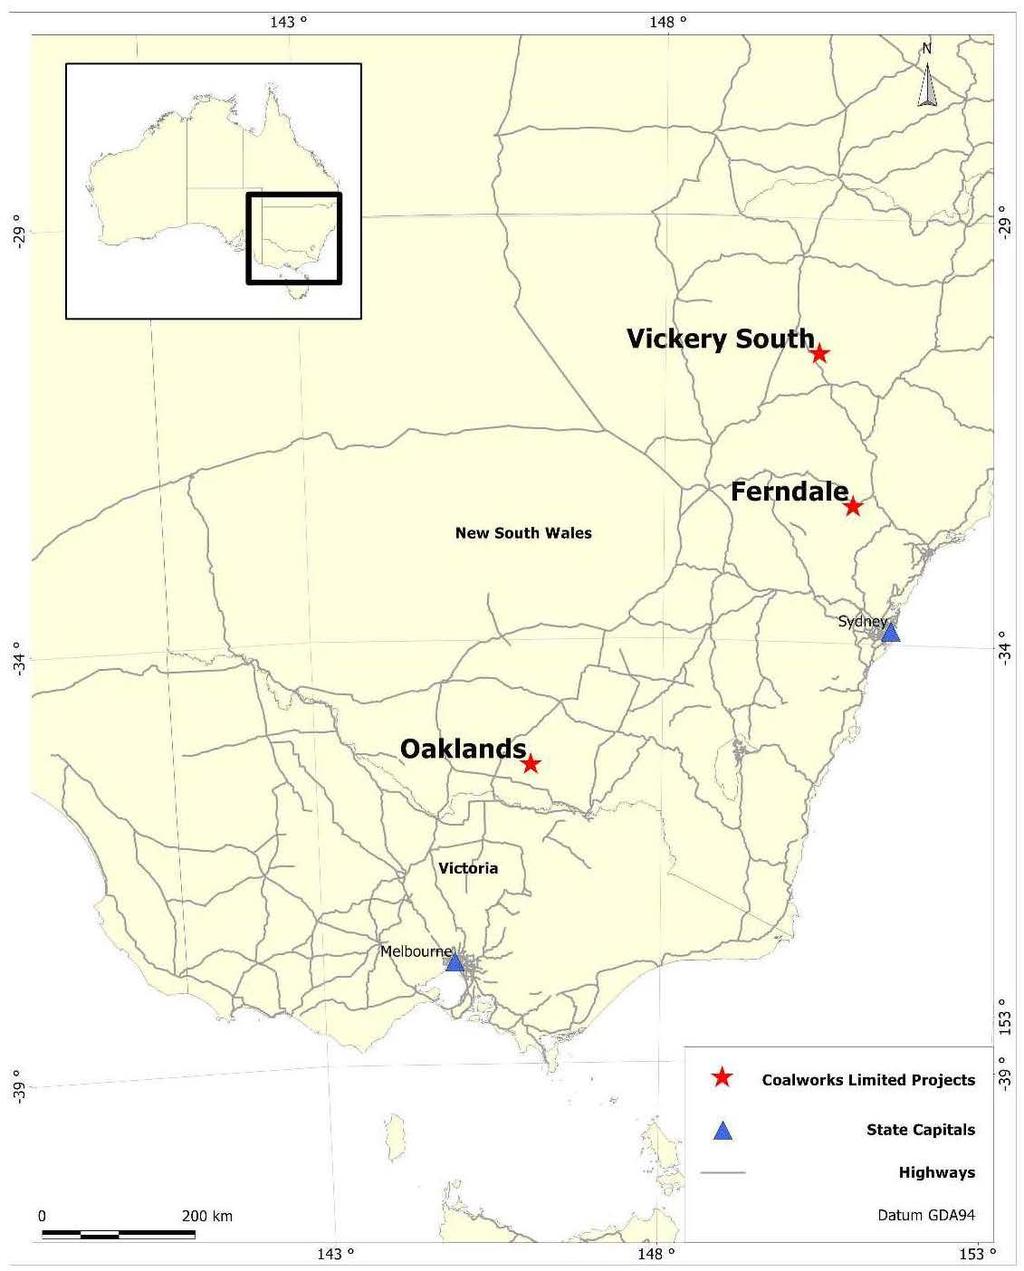 The locations of Coalworks projects in Australia are shown in